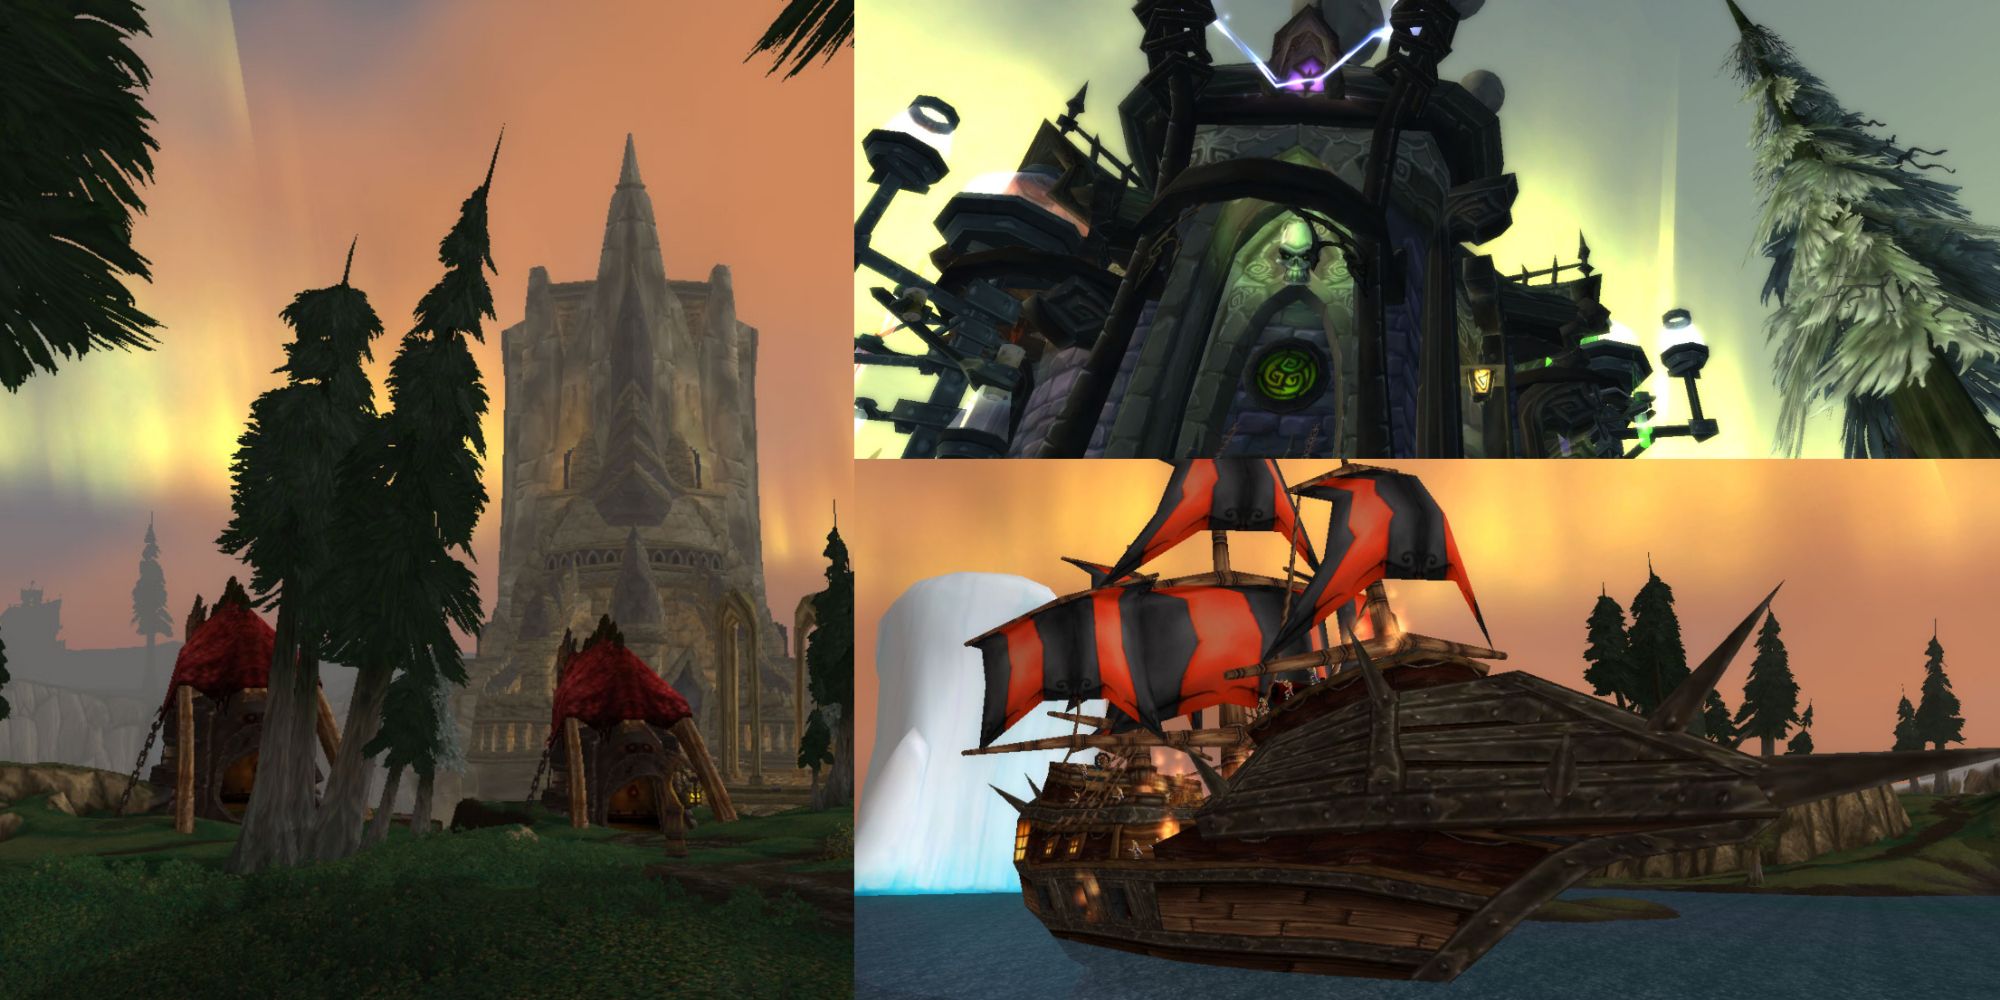 Classic WoW: How To Get To Northrend, A Guide To Air And Sea Routes